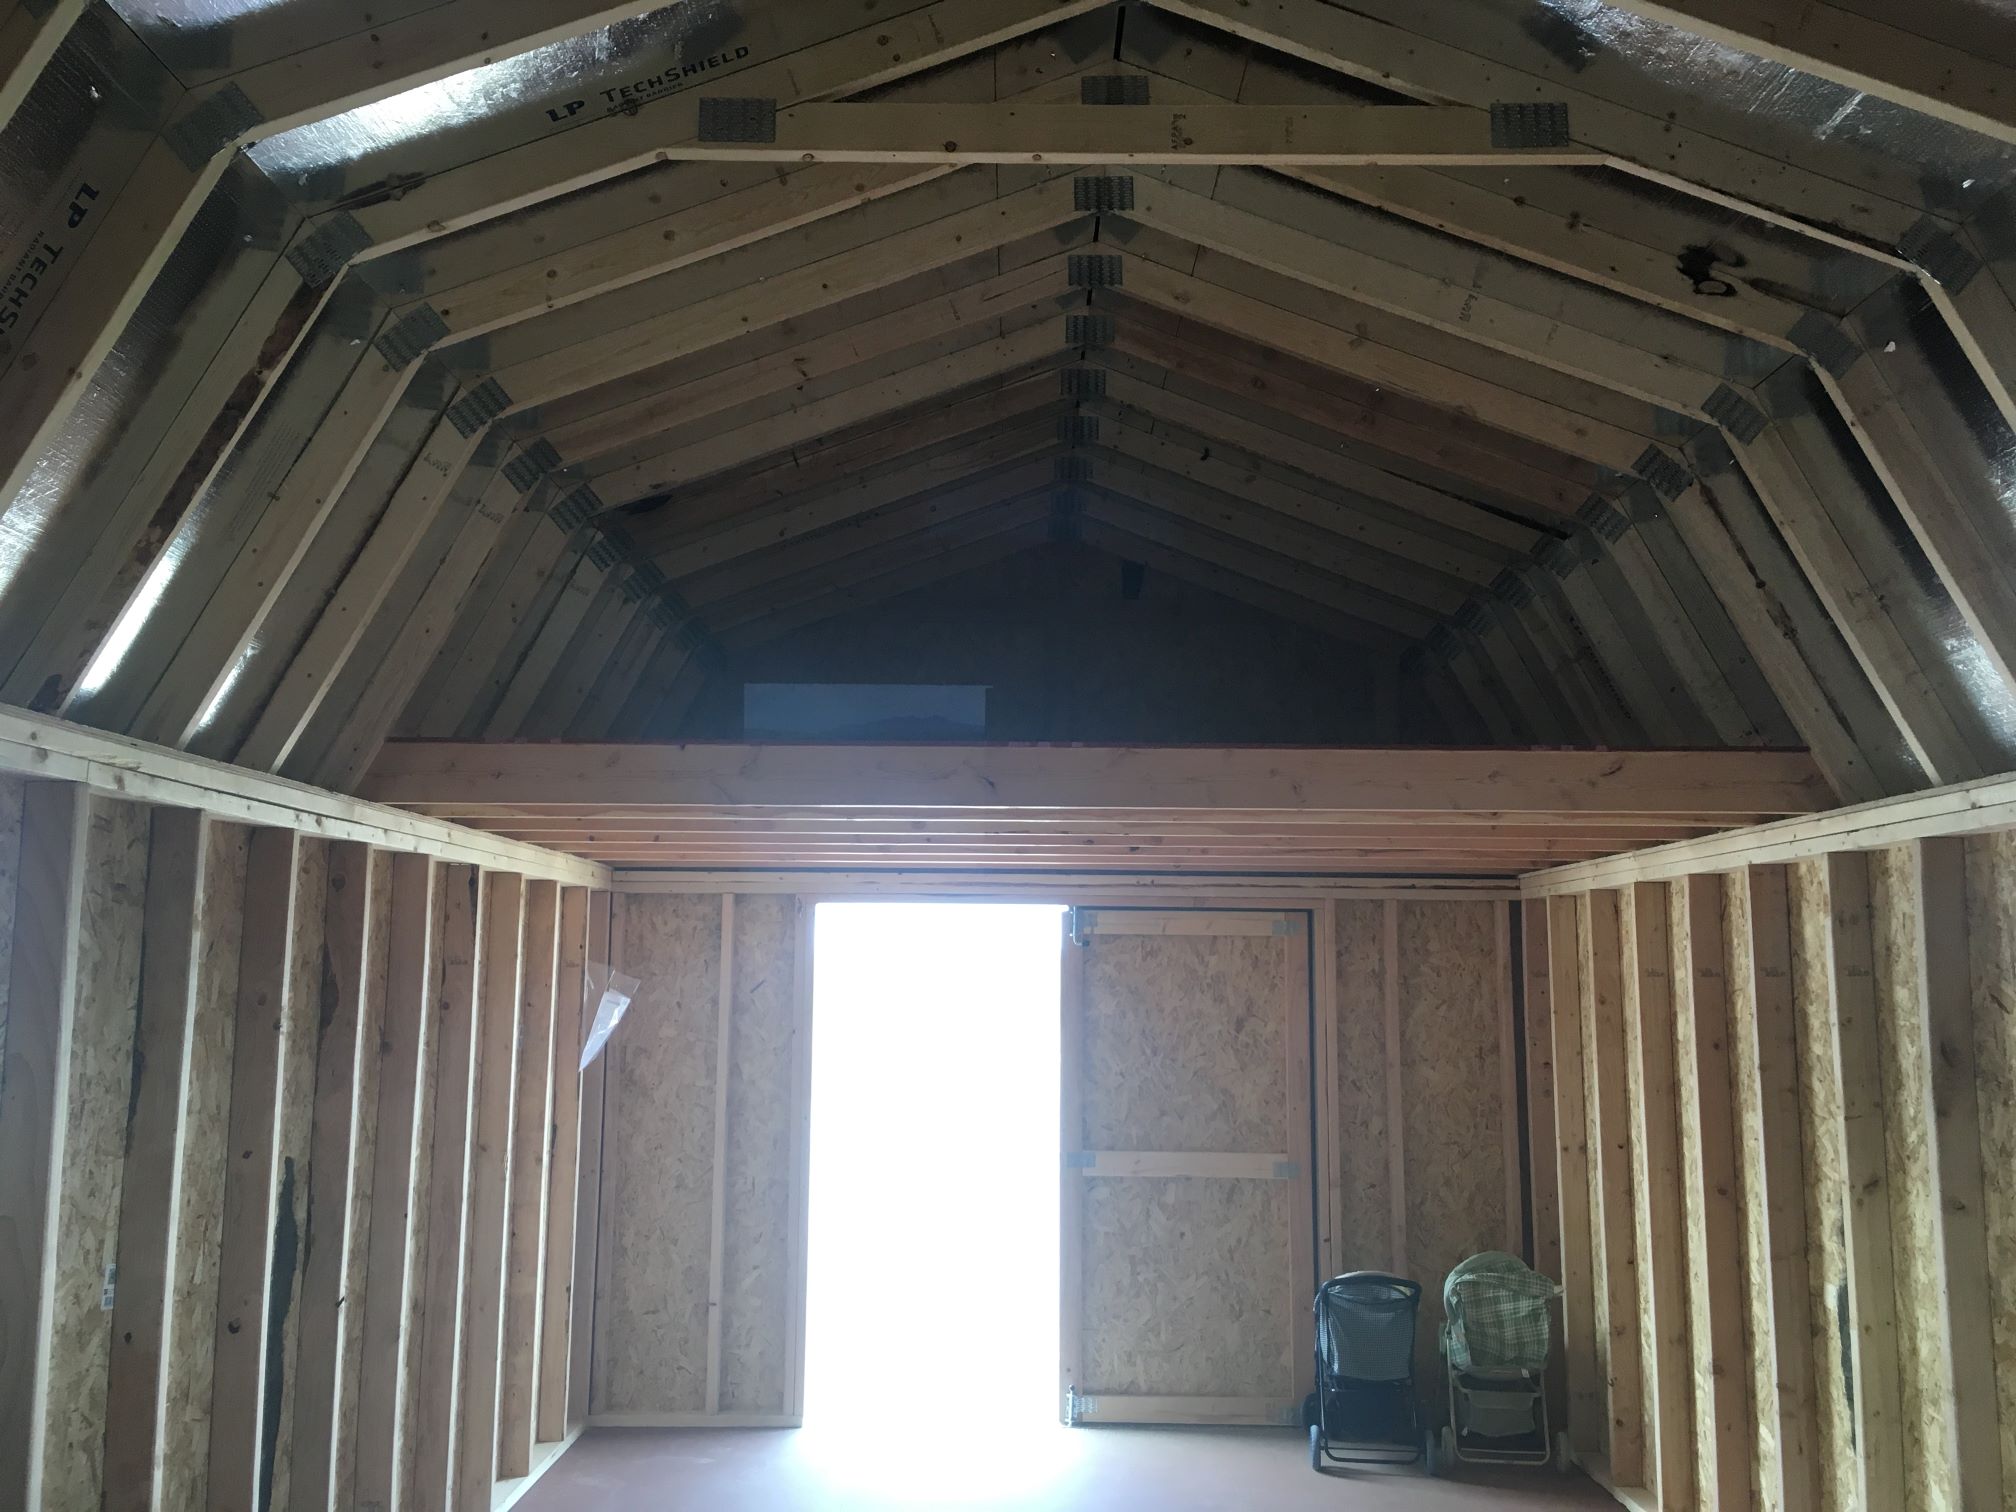 Interior of a High Barn Shed with a loft